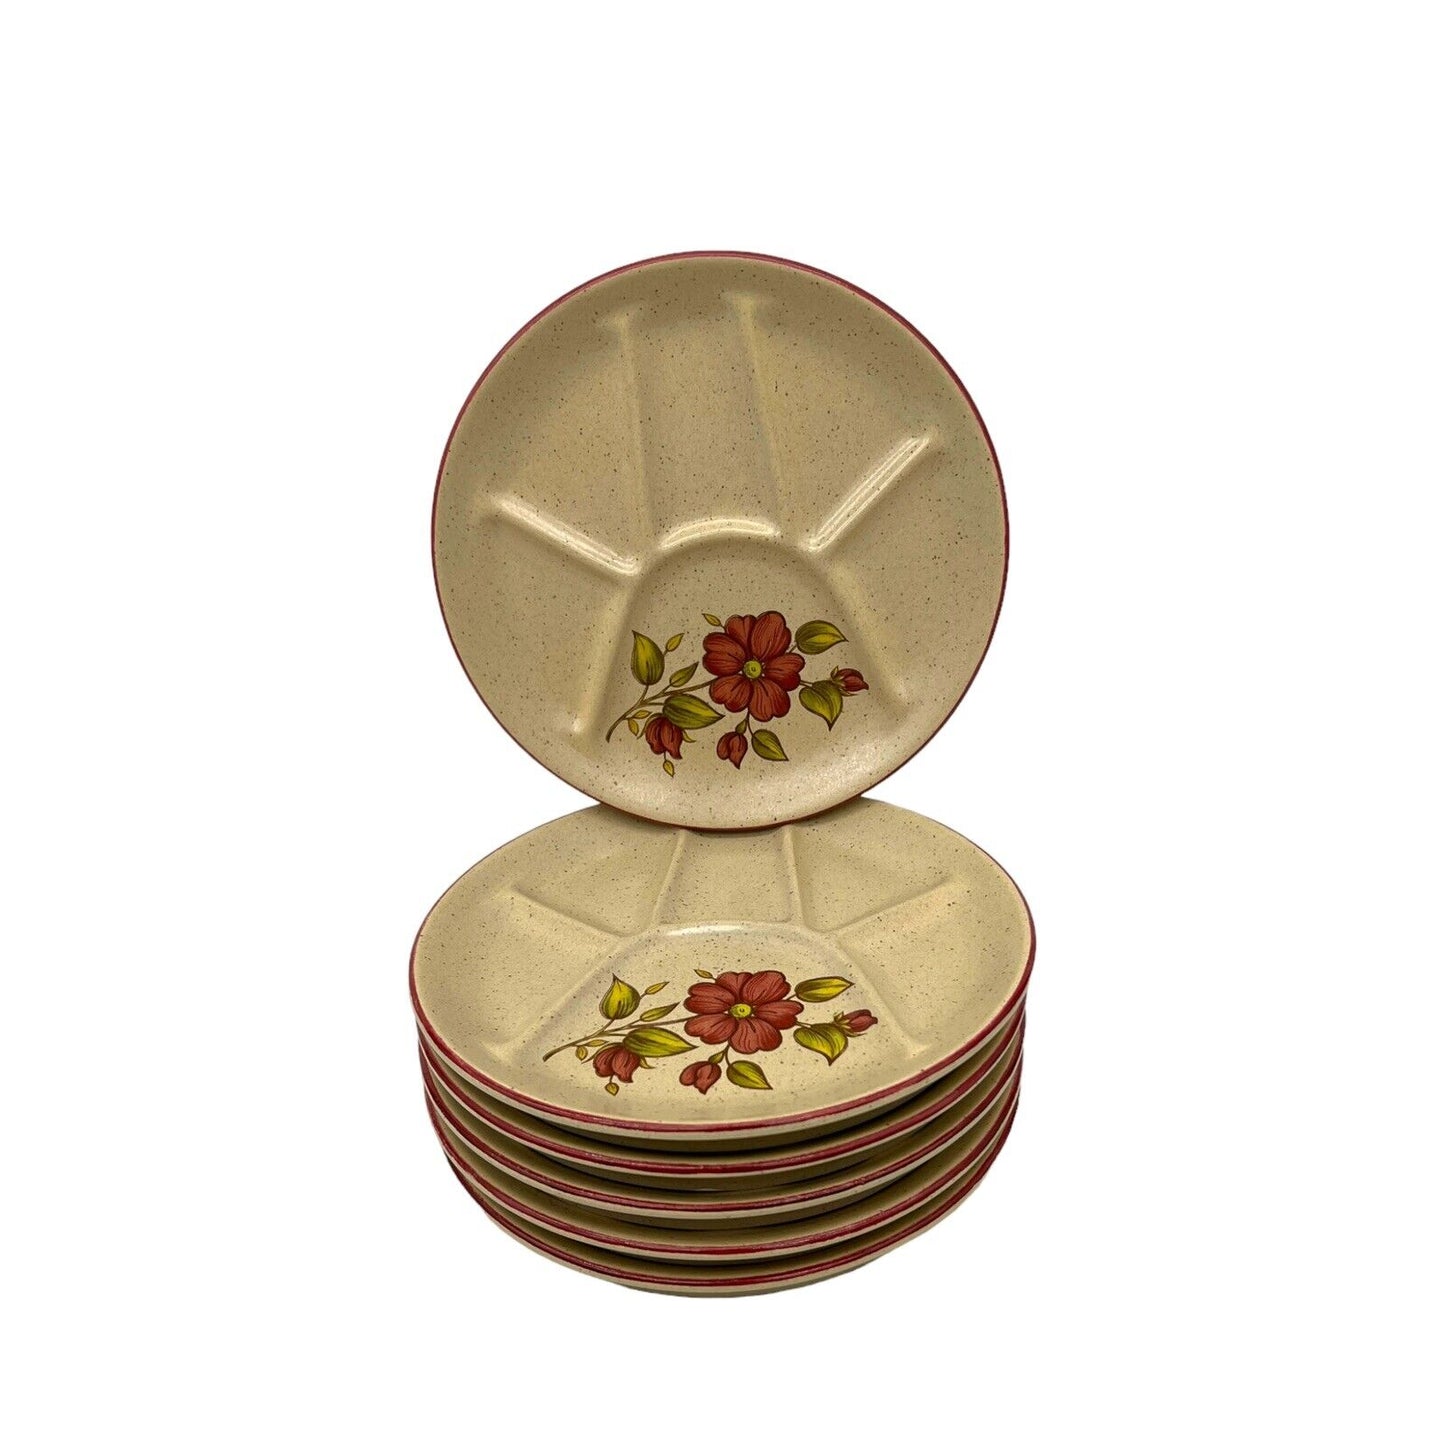 image 2 French glazed stoneware fondue sectioned plate set sold by All Things French Store